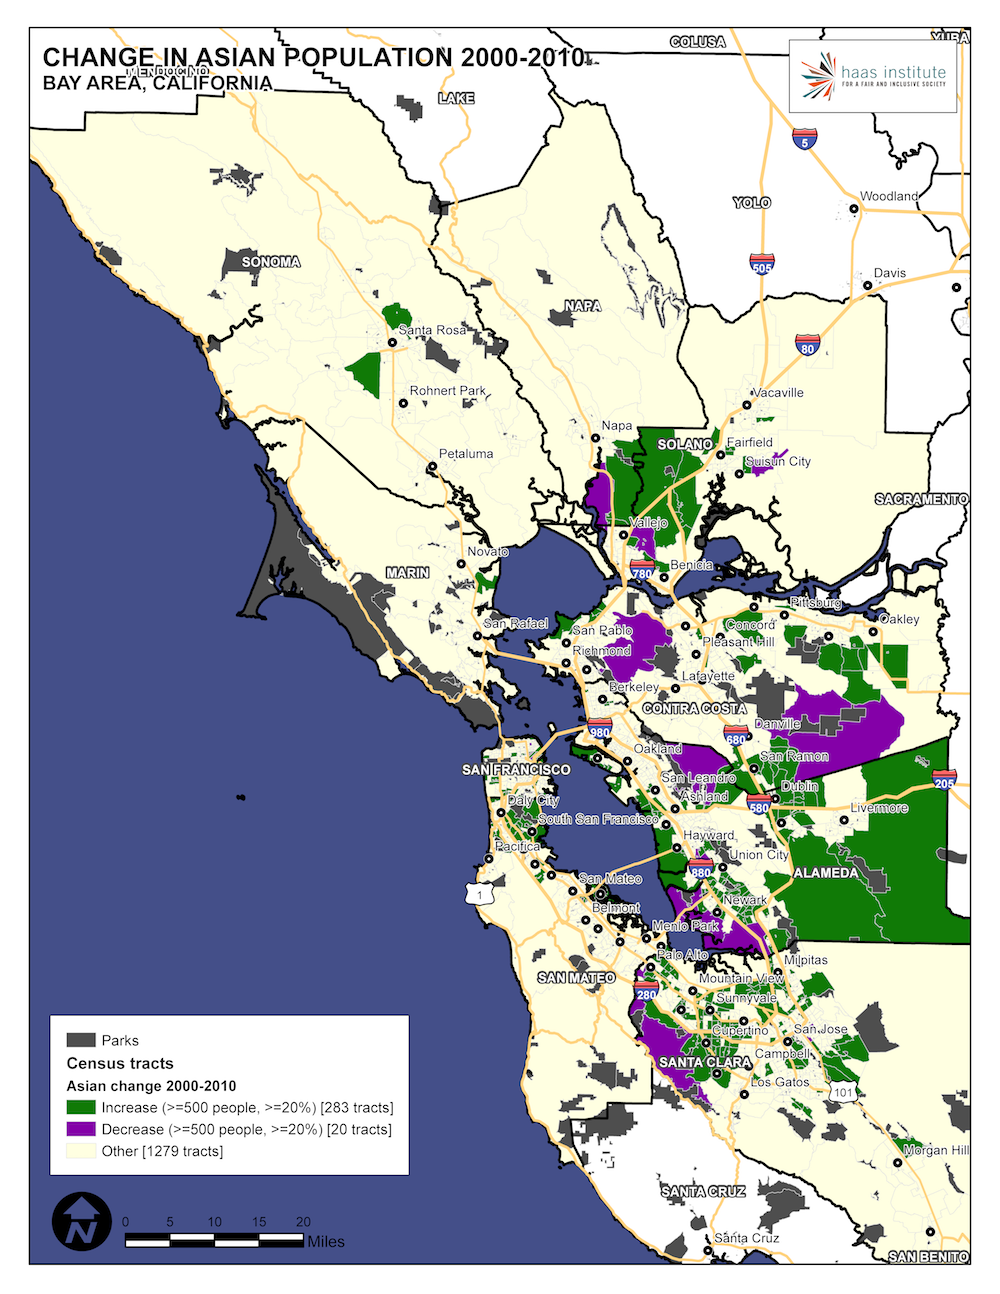 Map shows change in Bay Area Asian population from 2000 to 2010